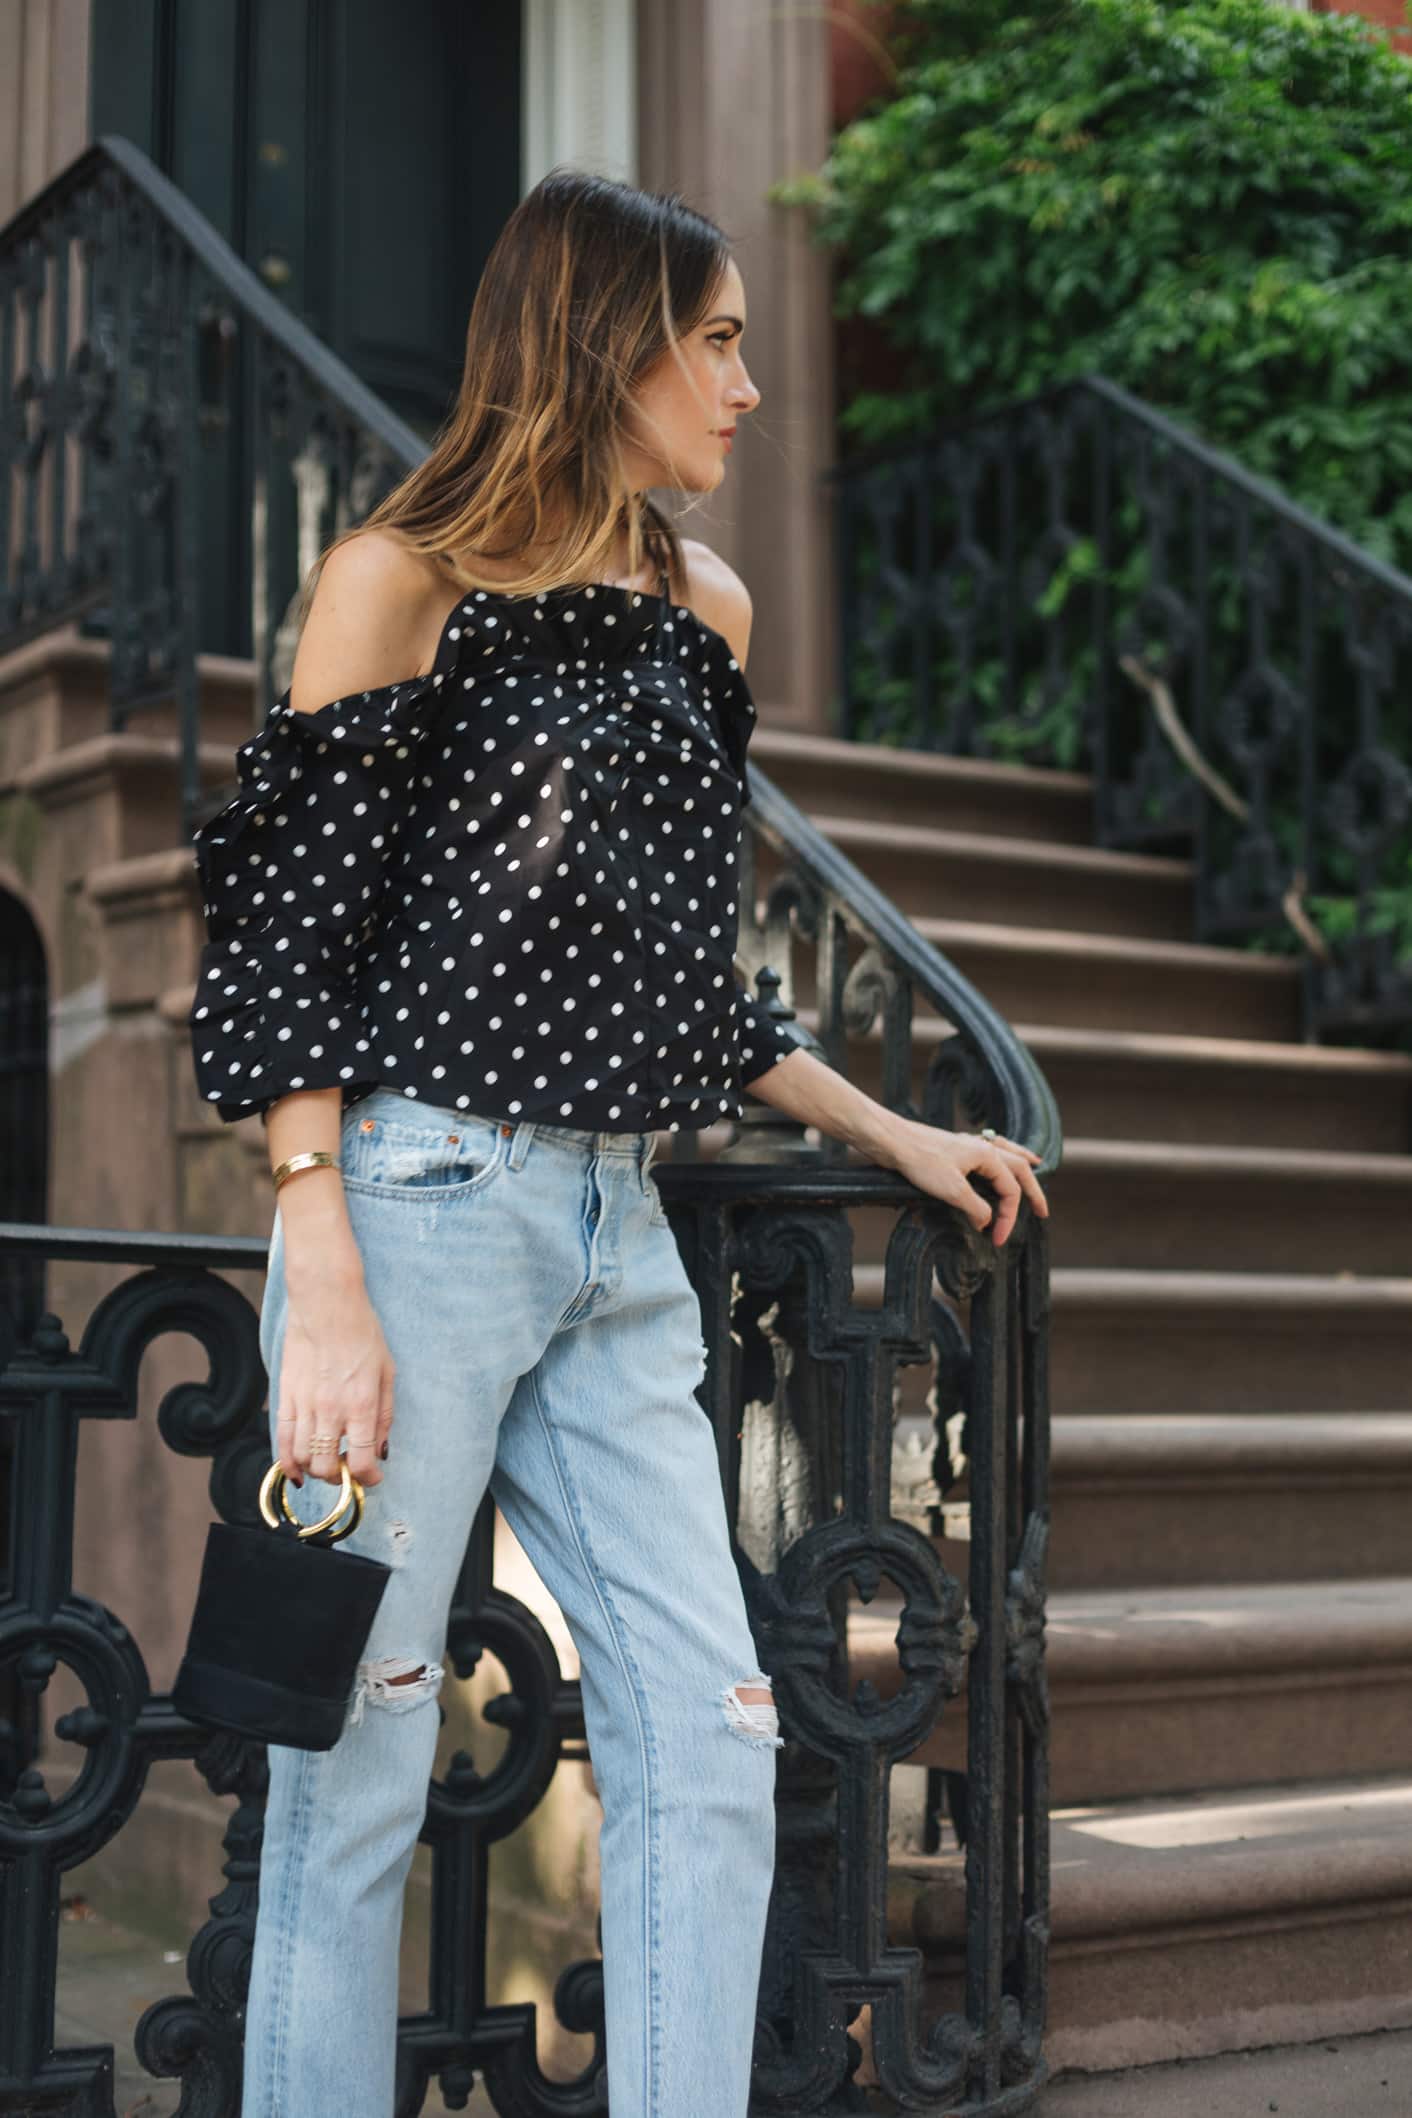 Louise Roe wearing polka dot top and mom jeans in NYC